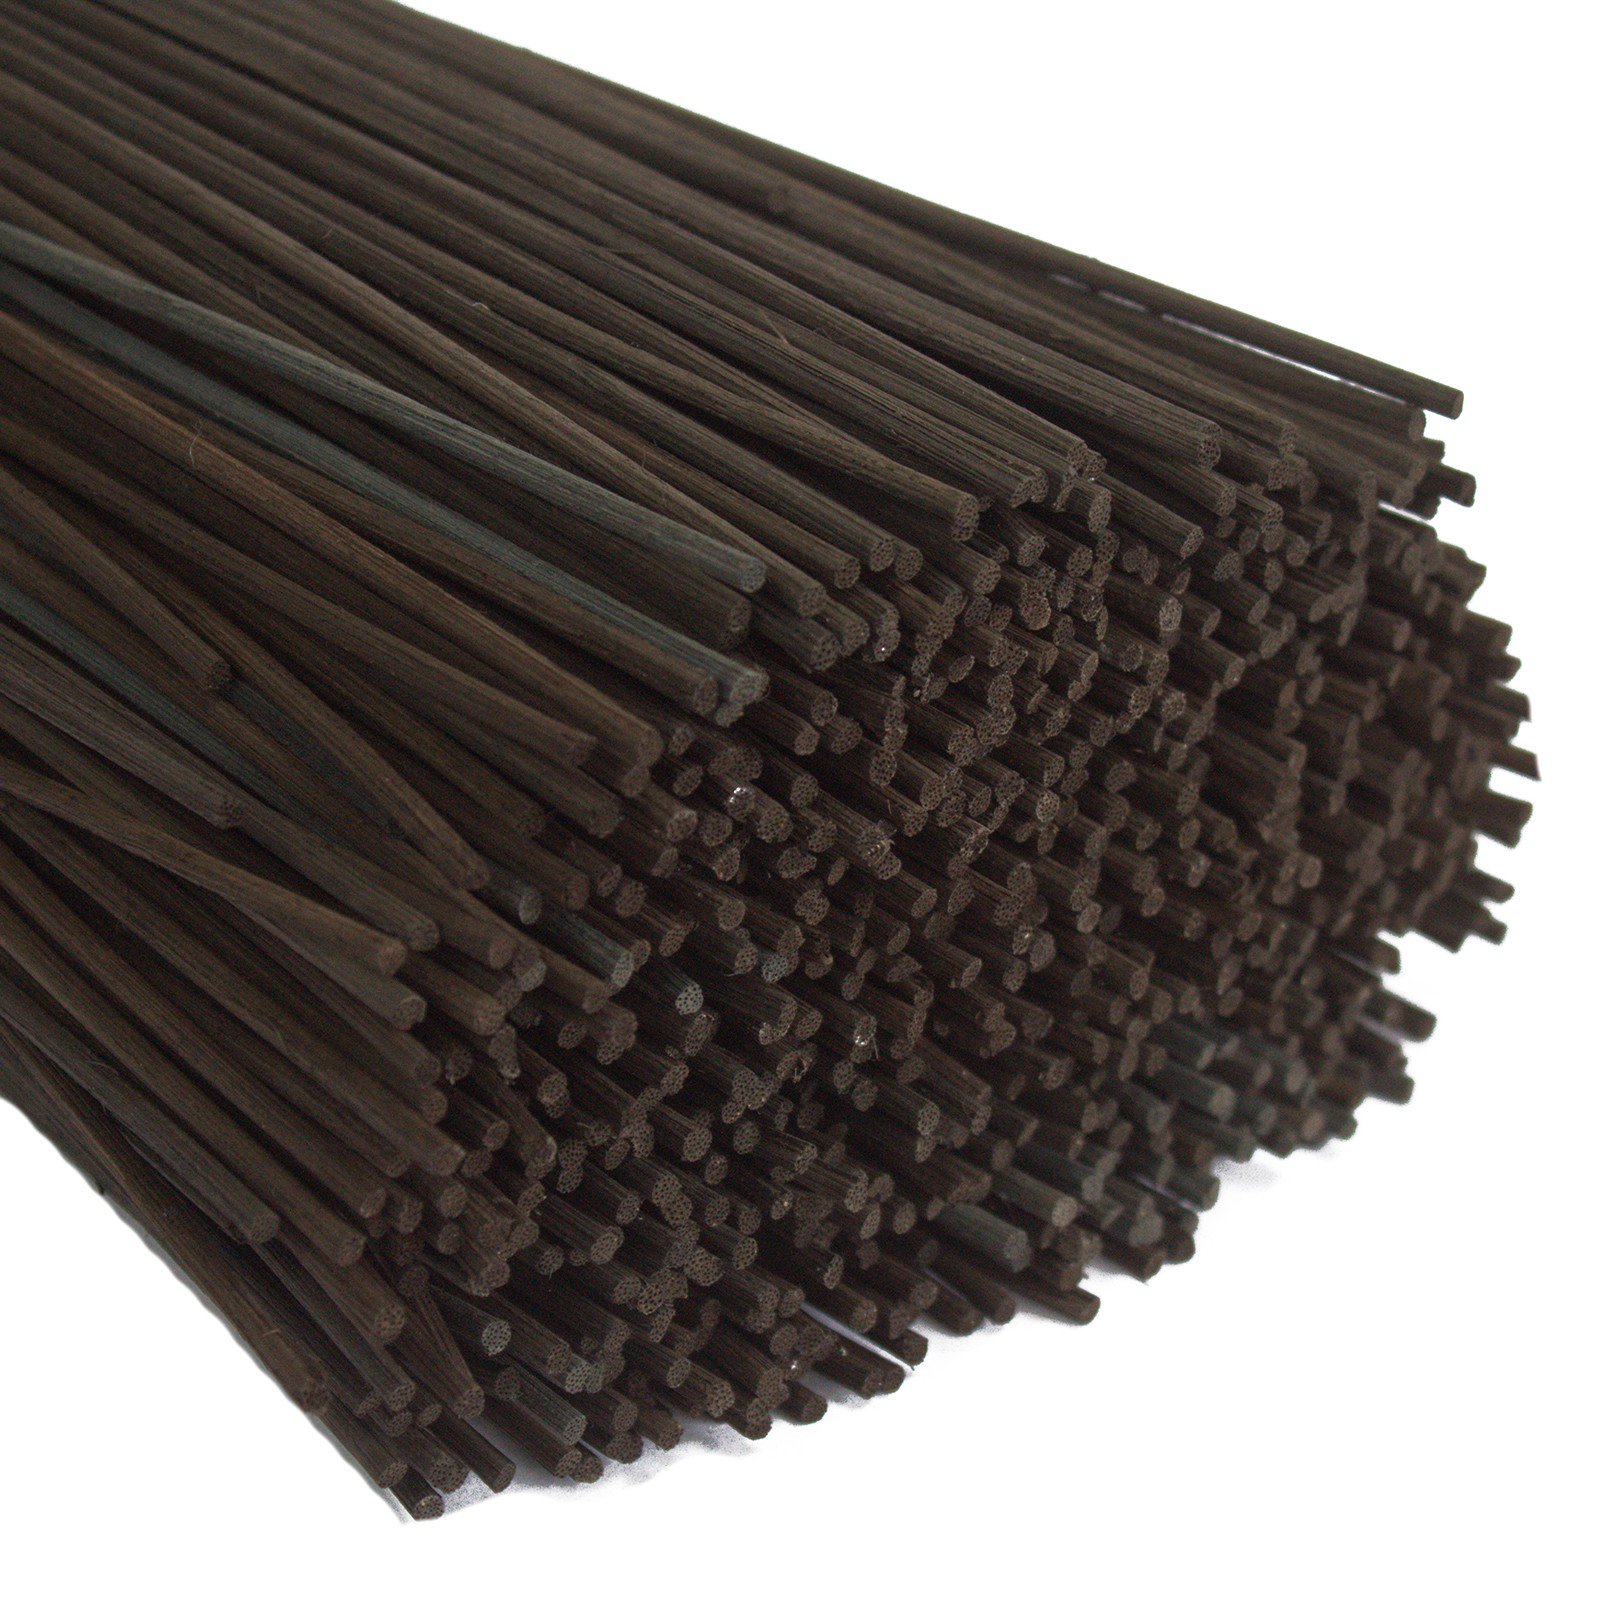 72 Pack of Black Reed Diffuser Sticks 3mm 